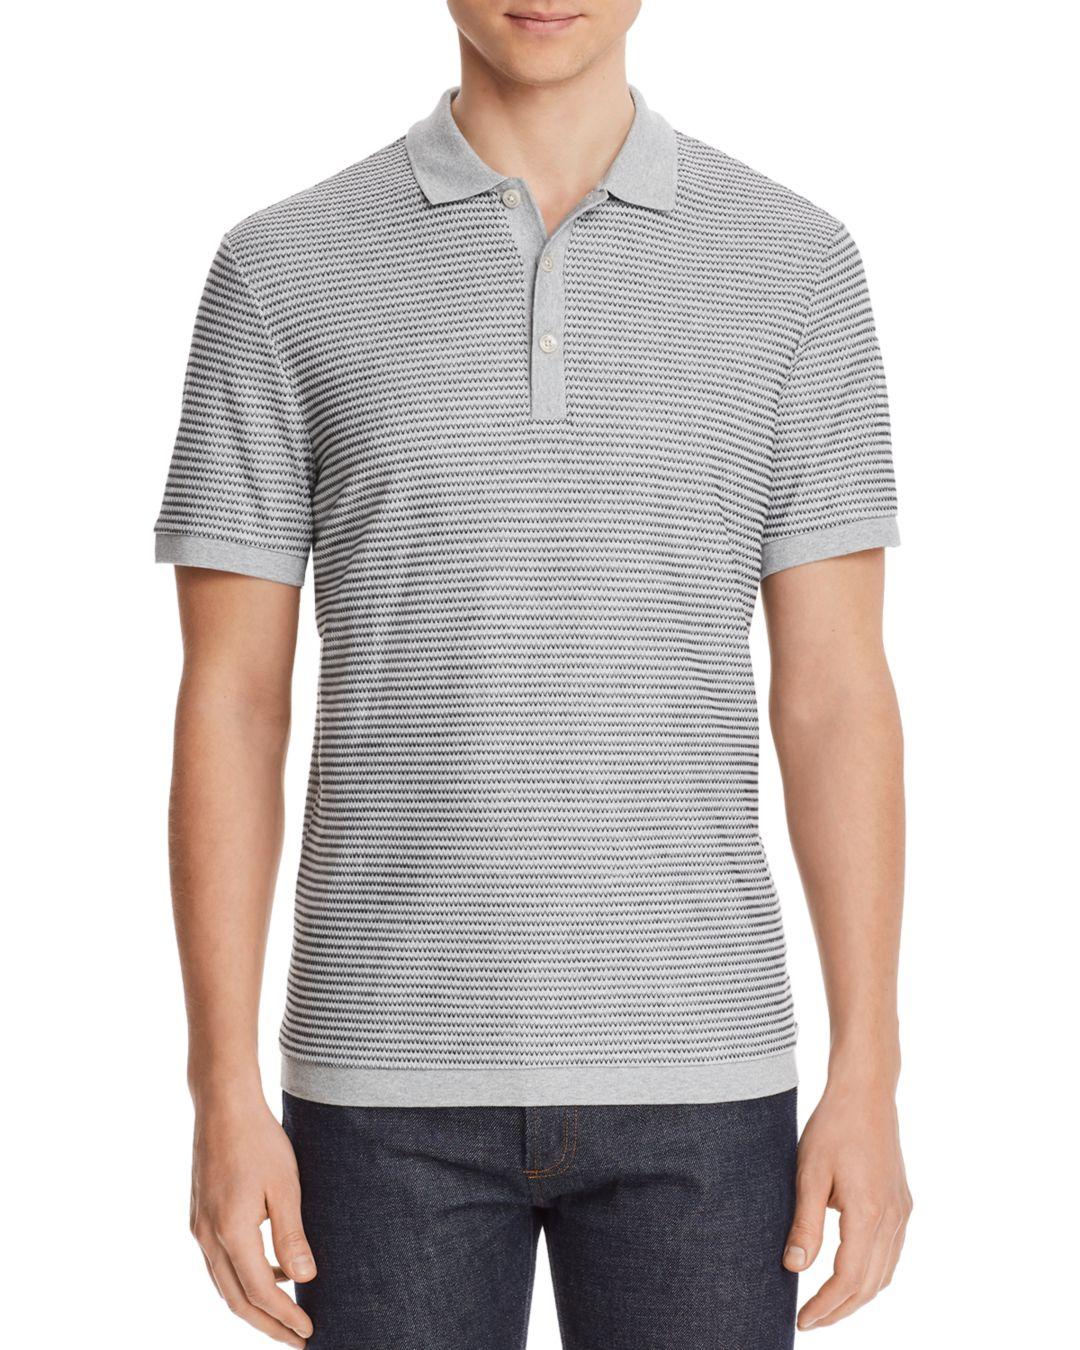 Michael Kors Textured Chevron Classic Fit Polo Shirt in Gray for Men - Lyst